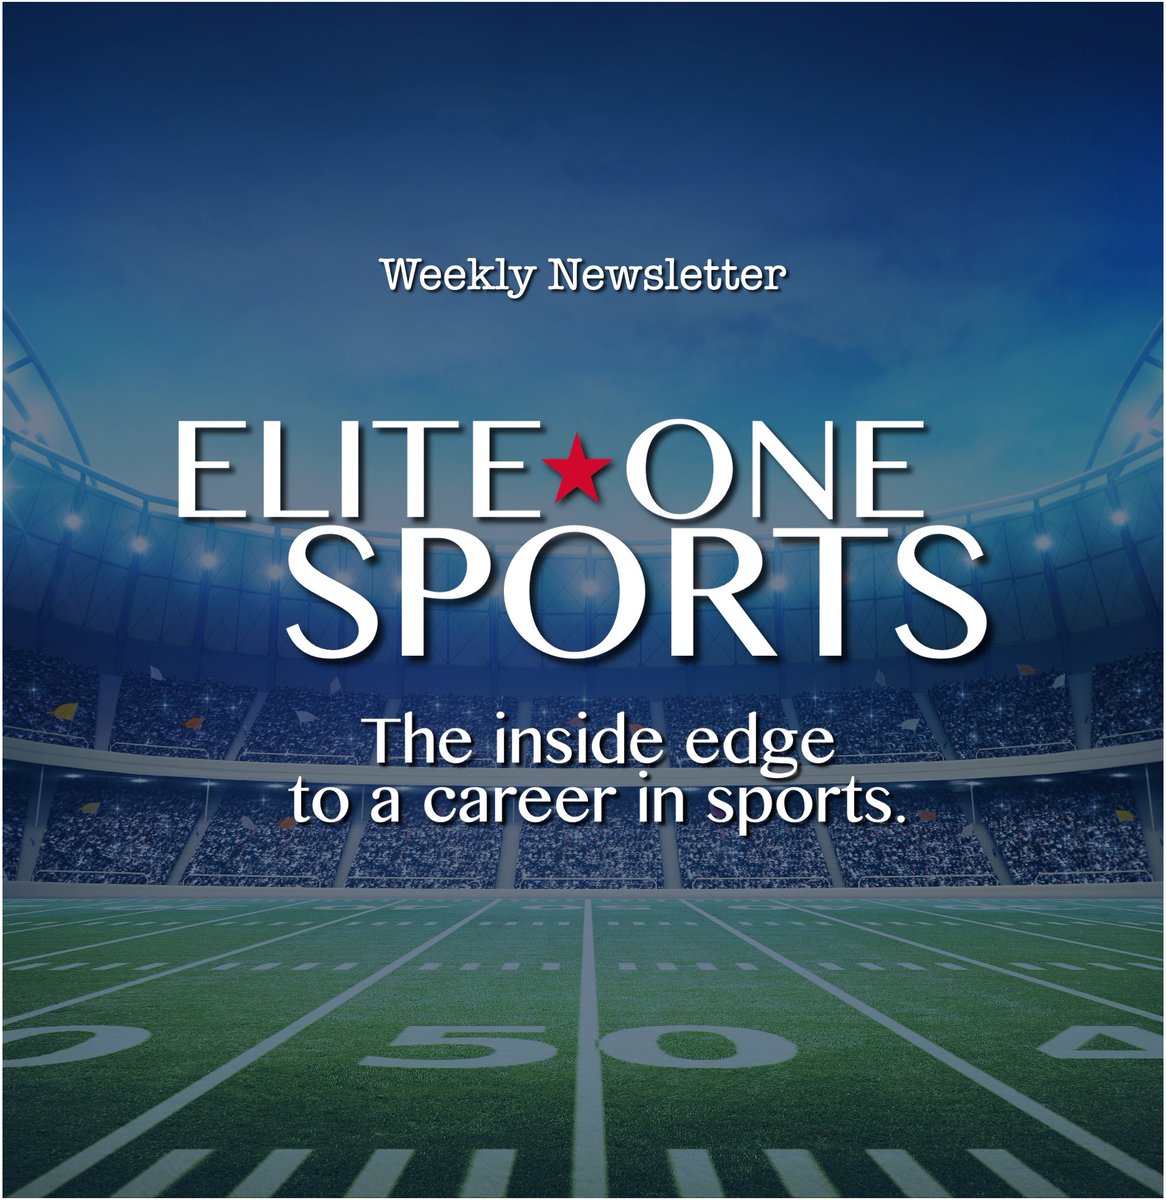 Interested in a career in sports?

If you want to gain an advantage over the millions vying for a career in sports, subscribe to my free weekly Elite One Sports e-mail newsletter for insights on how to break in.

Sign up at zanestoddard.com.

#SportsJobs #sportscareer